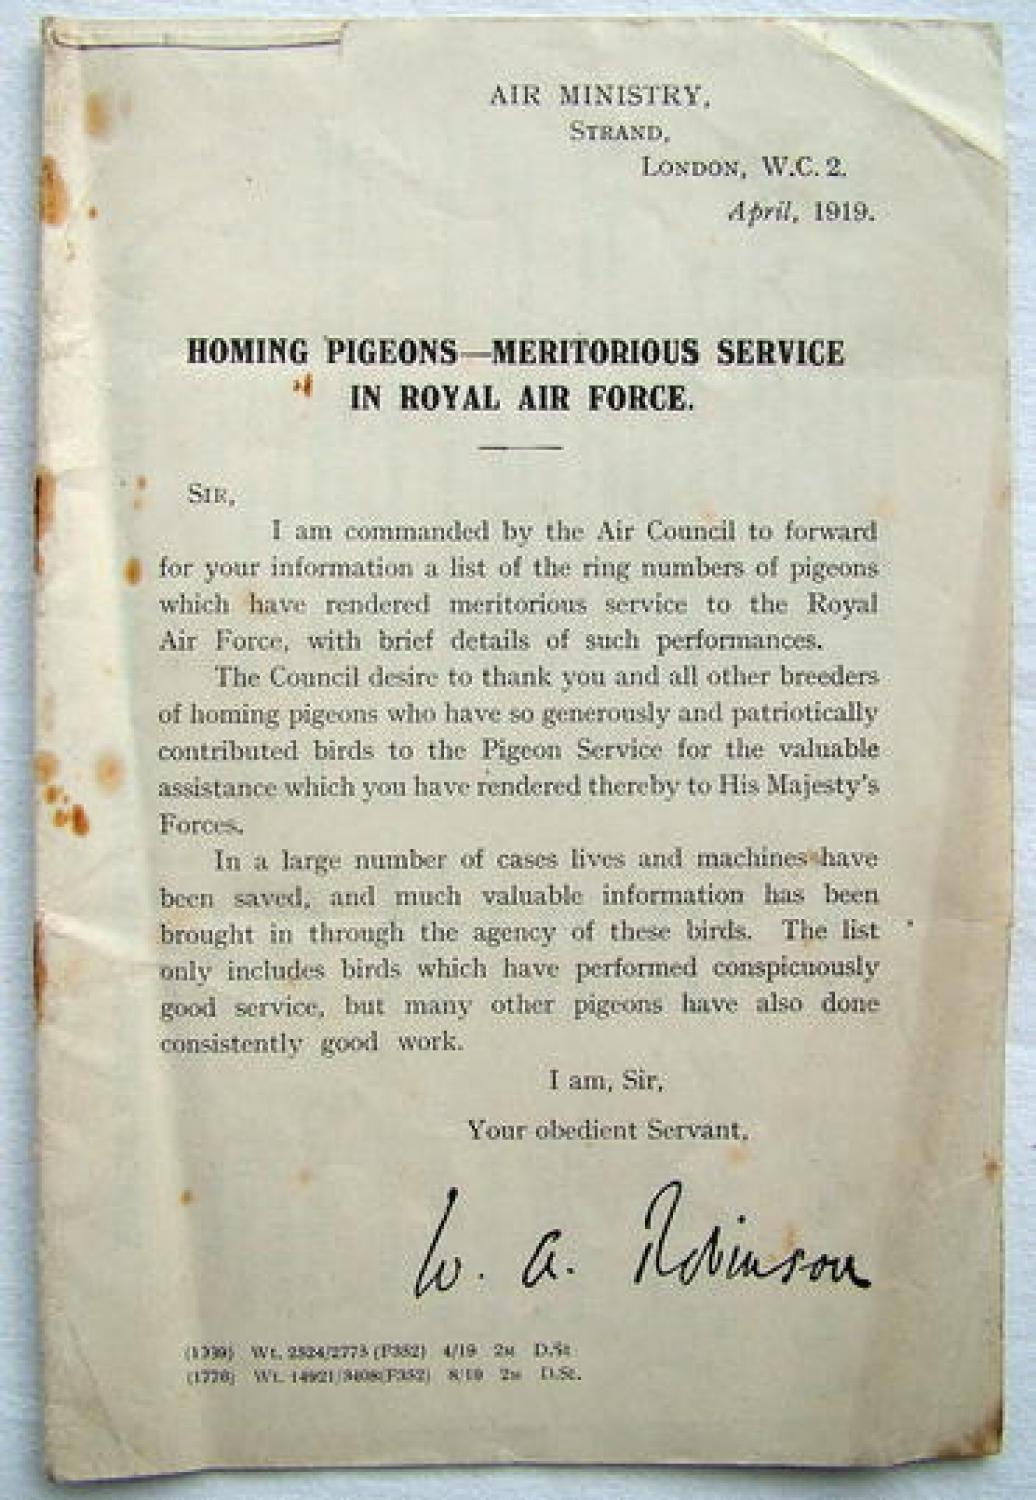 A.M. Booklet : Homing Pigeons, Meritous Service